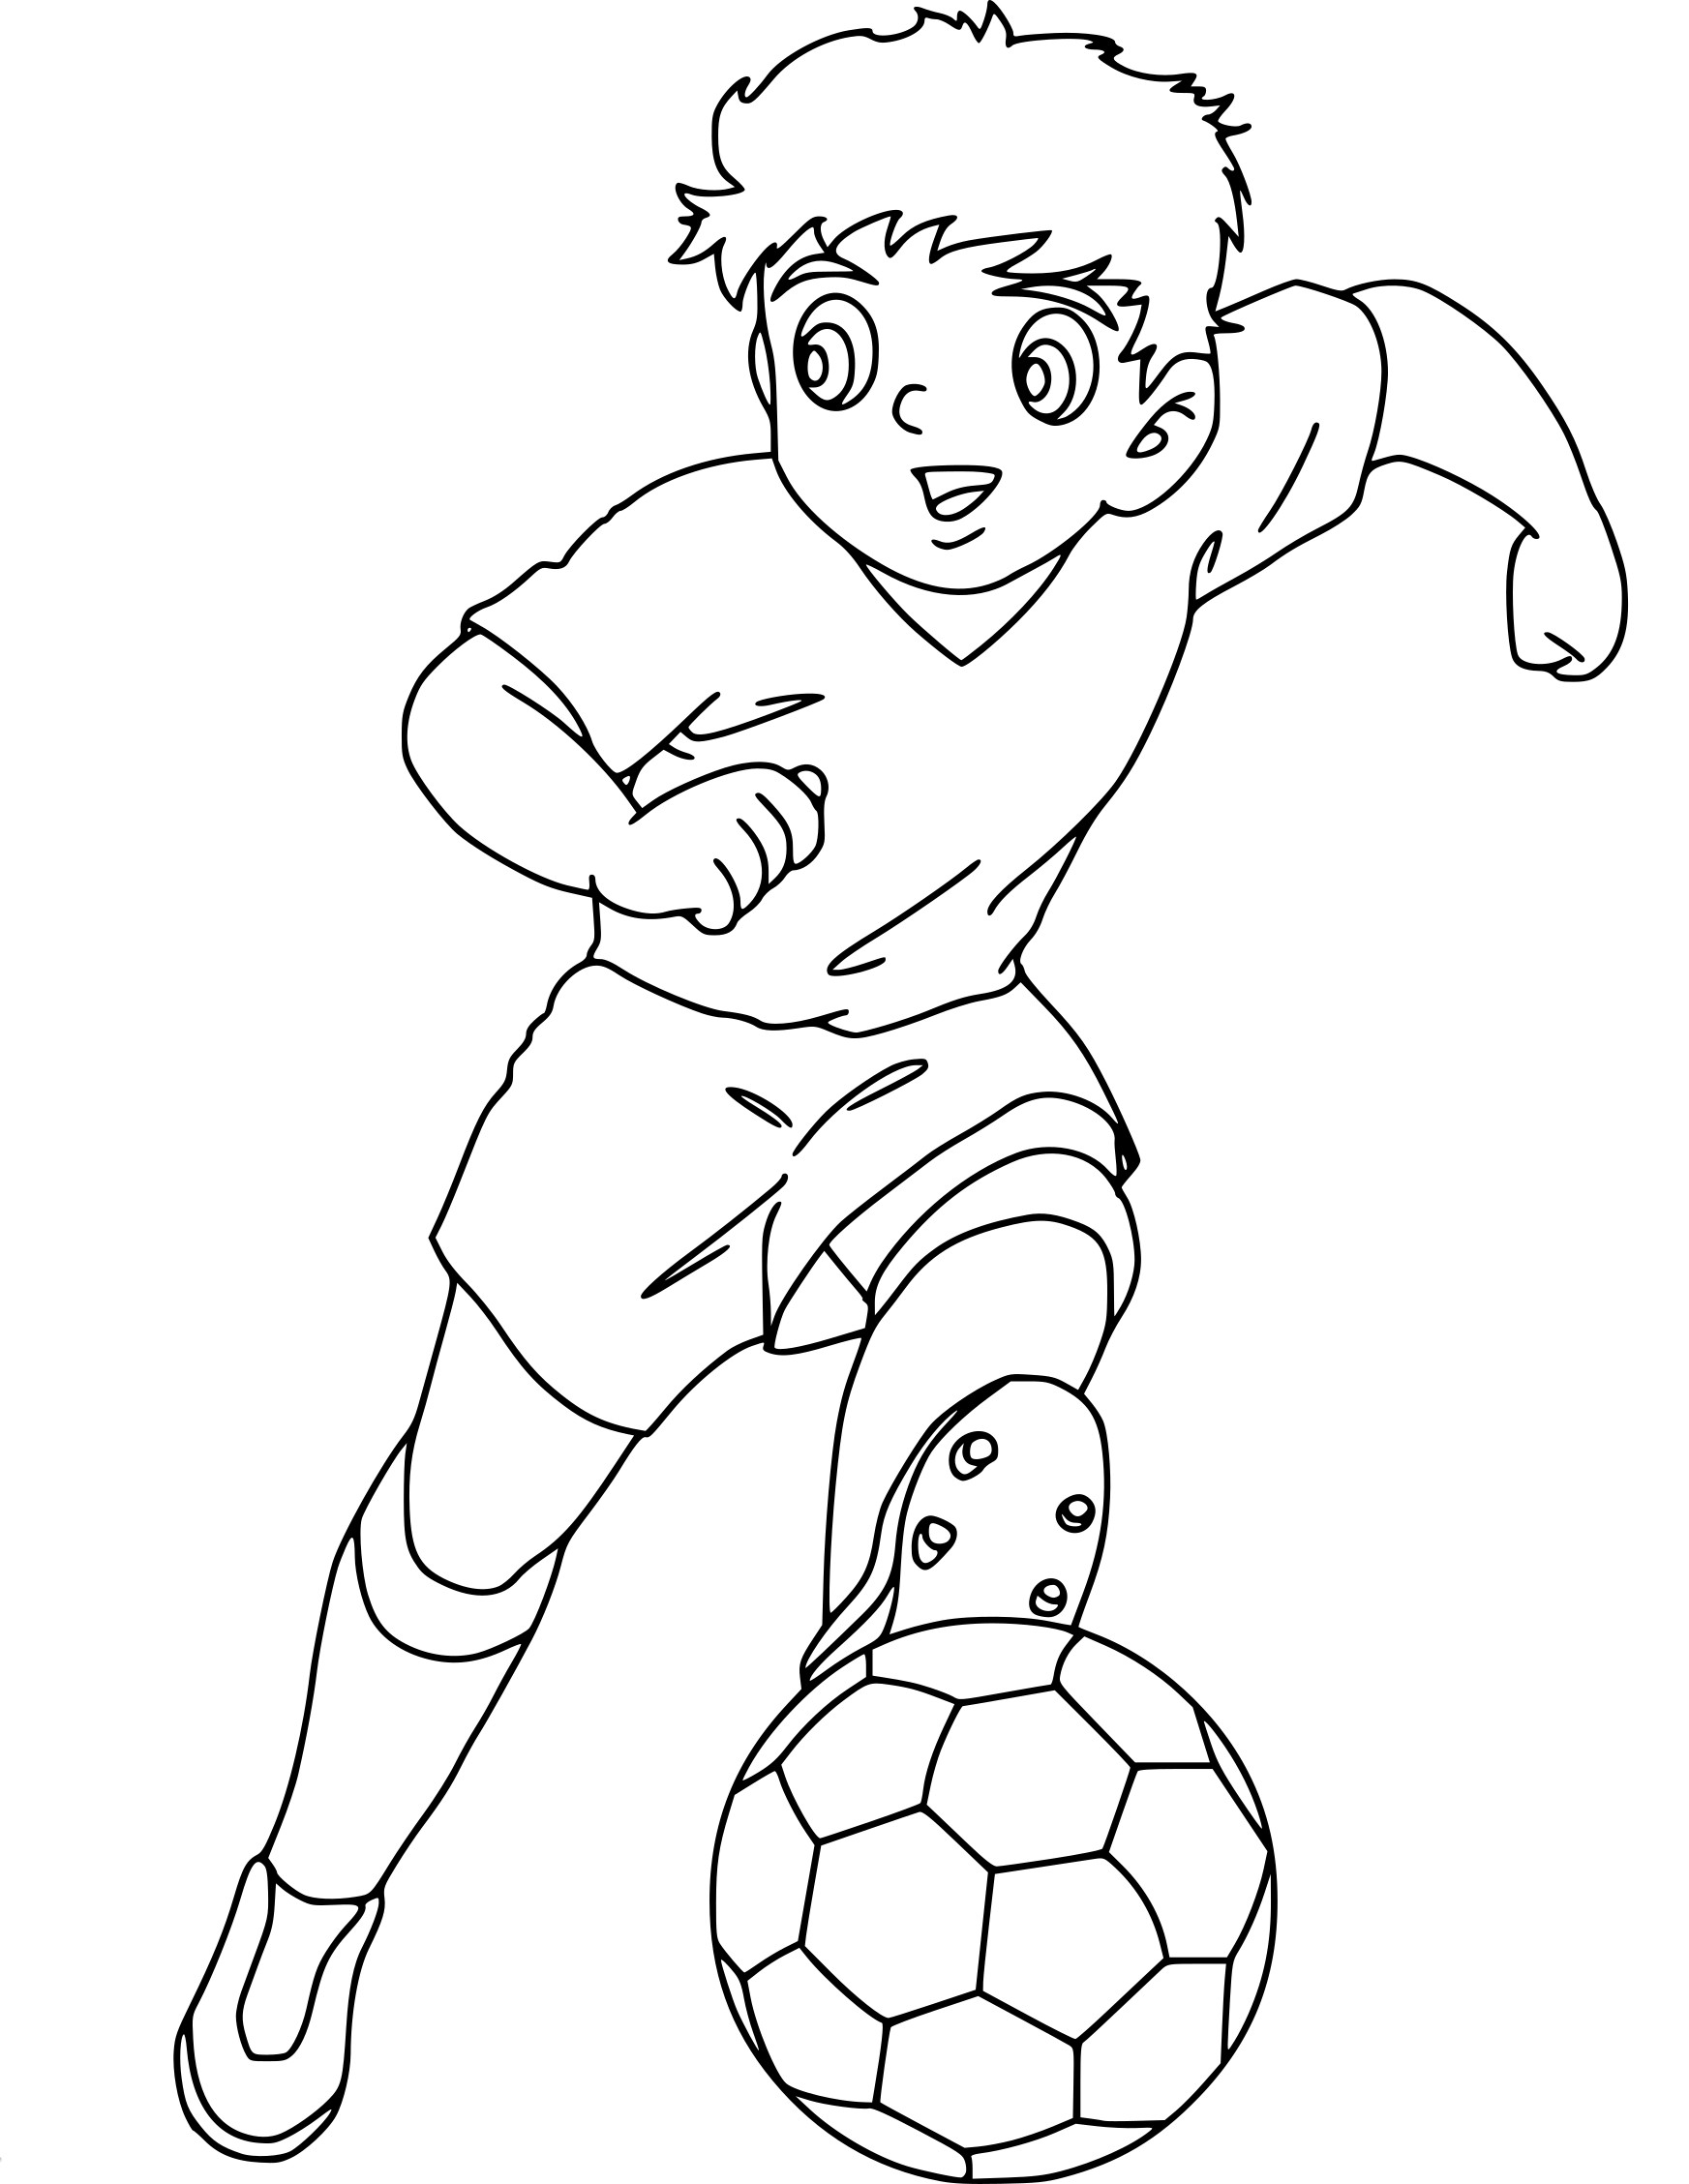 Olive And Tom drawing and coloring page